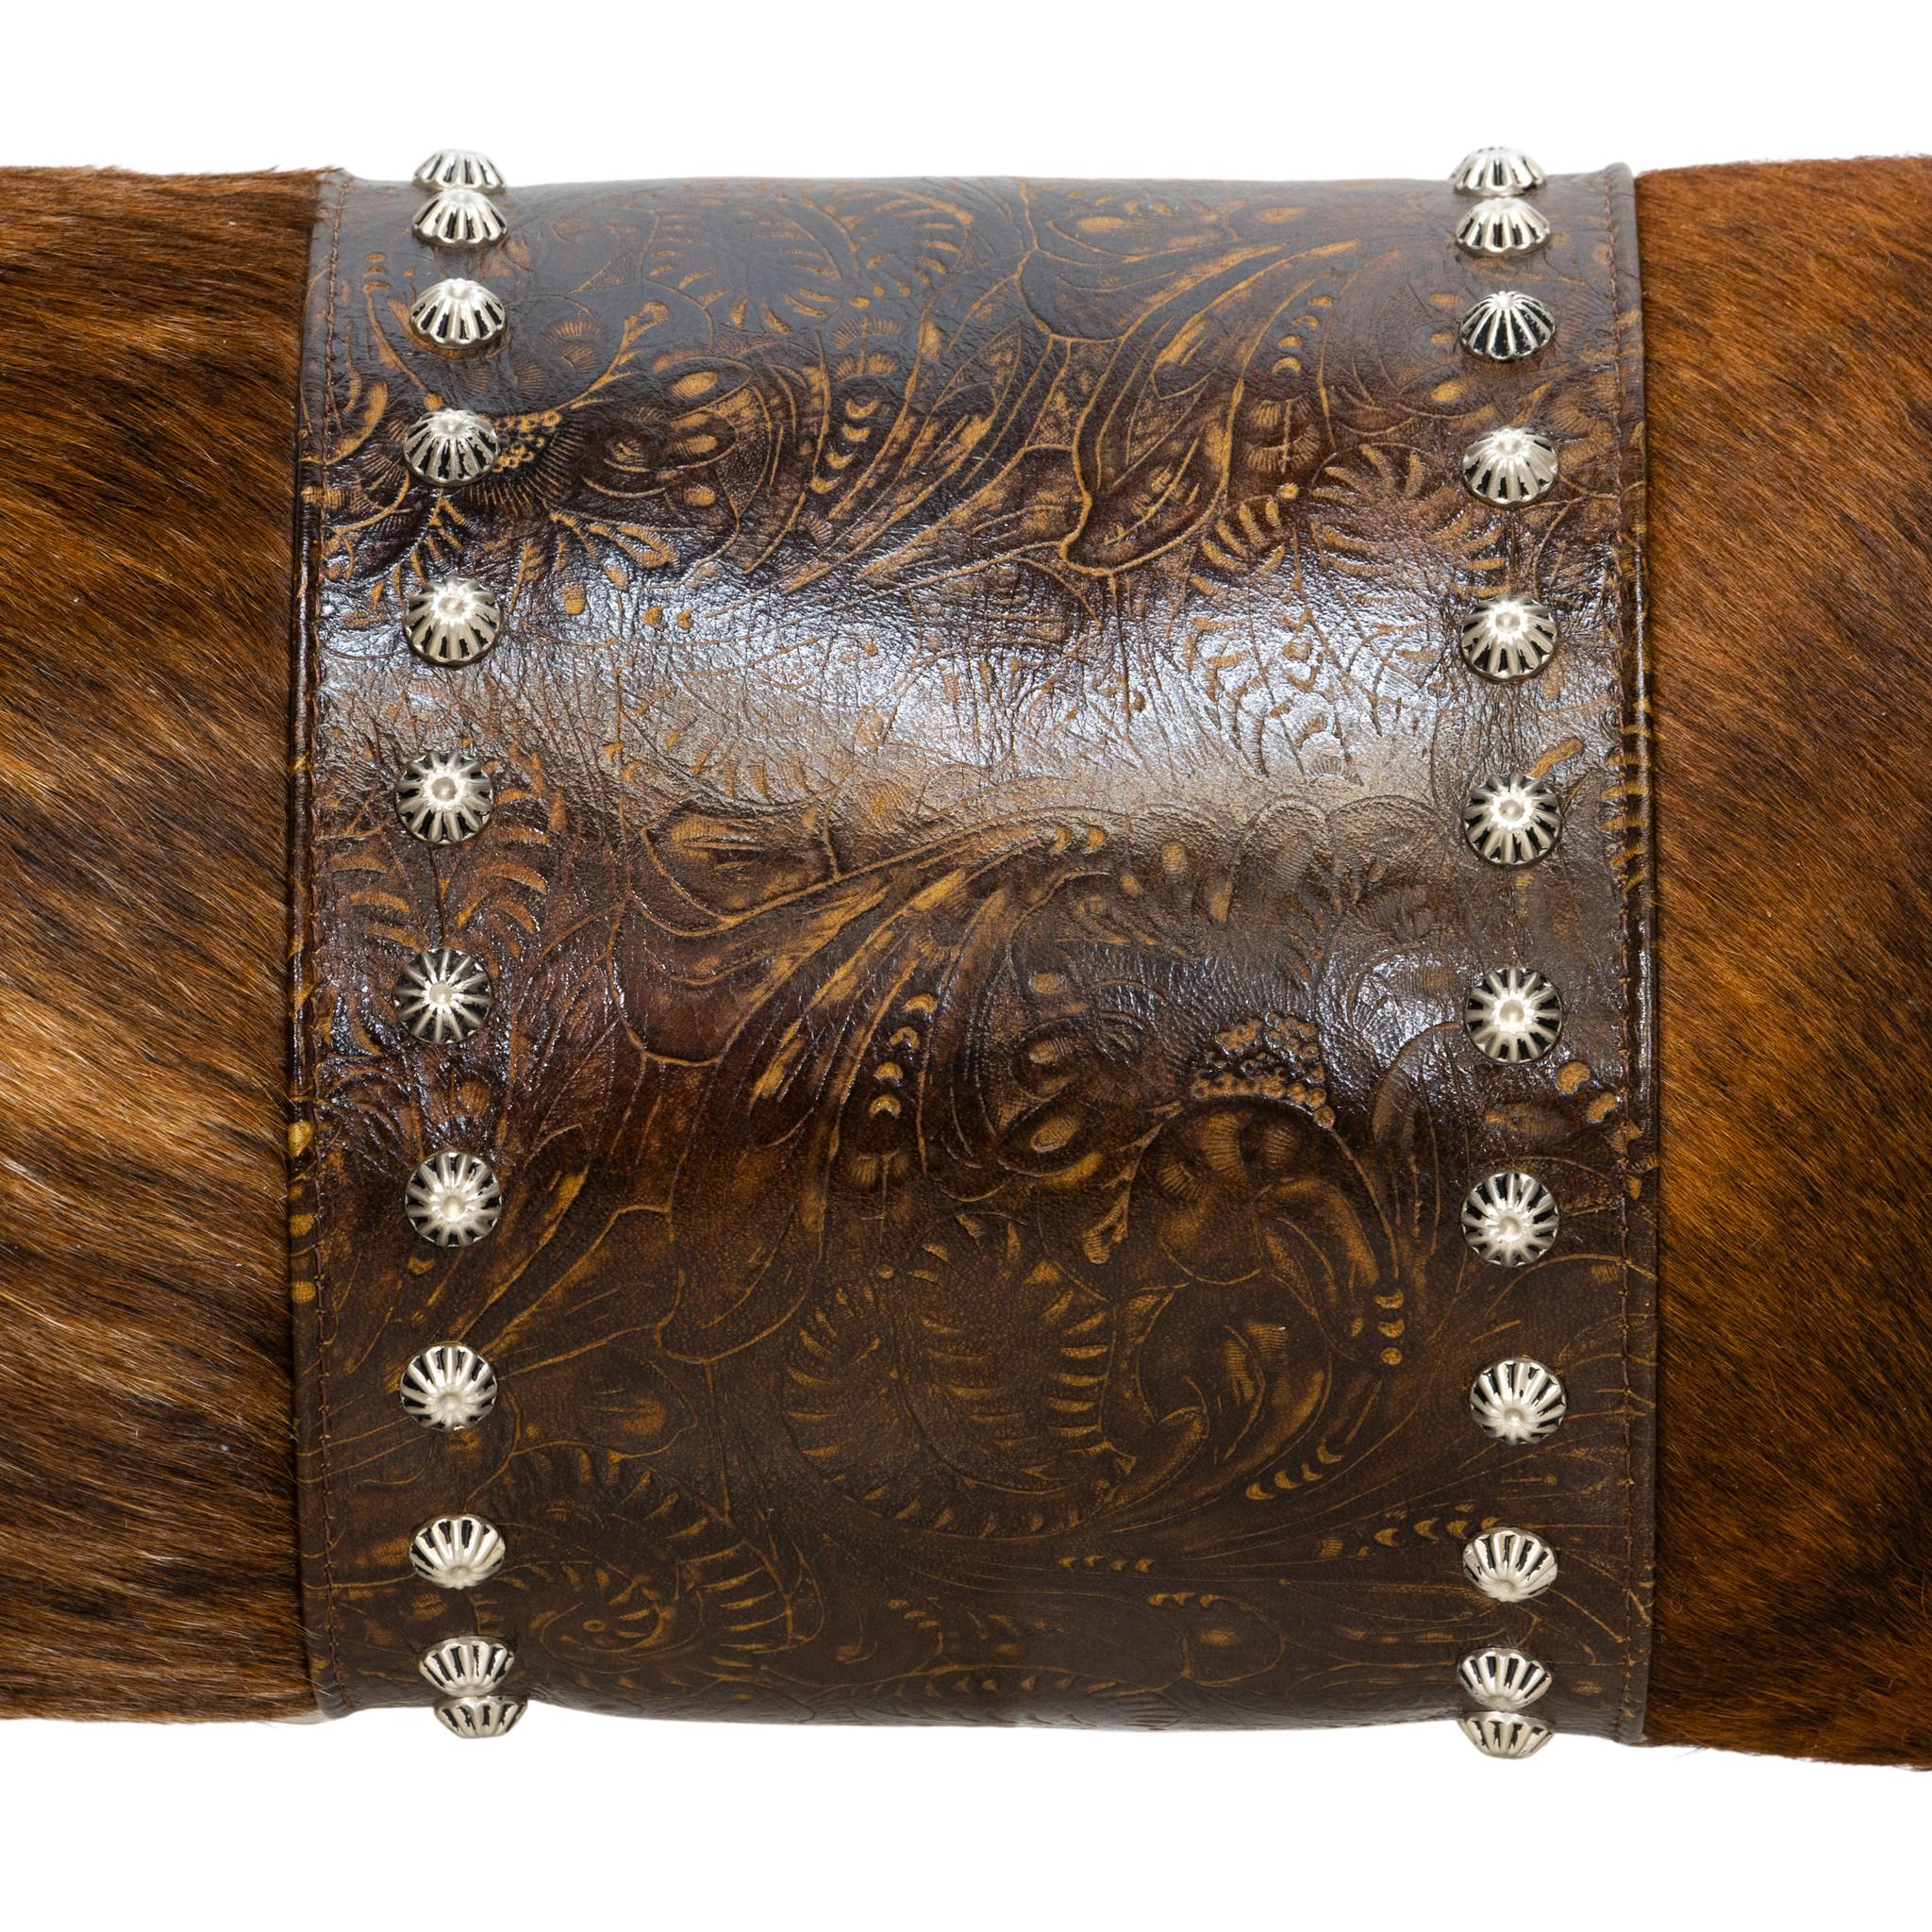 Decorative leather pillow of brindle cowhide with tooled leather and decorative tacks. The unusual brindle coloring blends nicely with the dark leather of the center and the sides. Tacks are only around center leather strip. A functional, yet